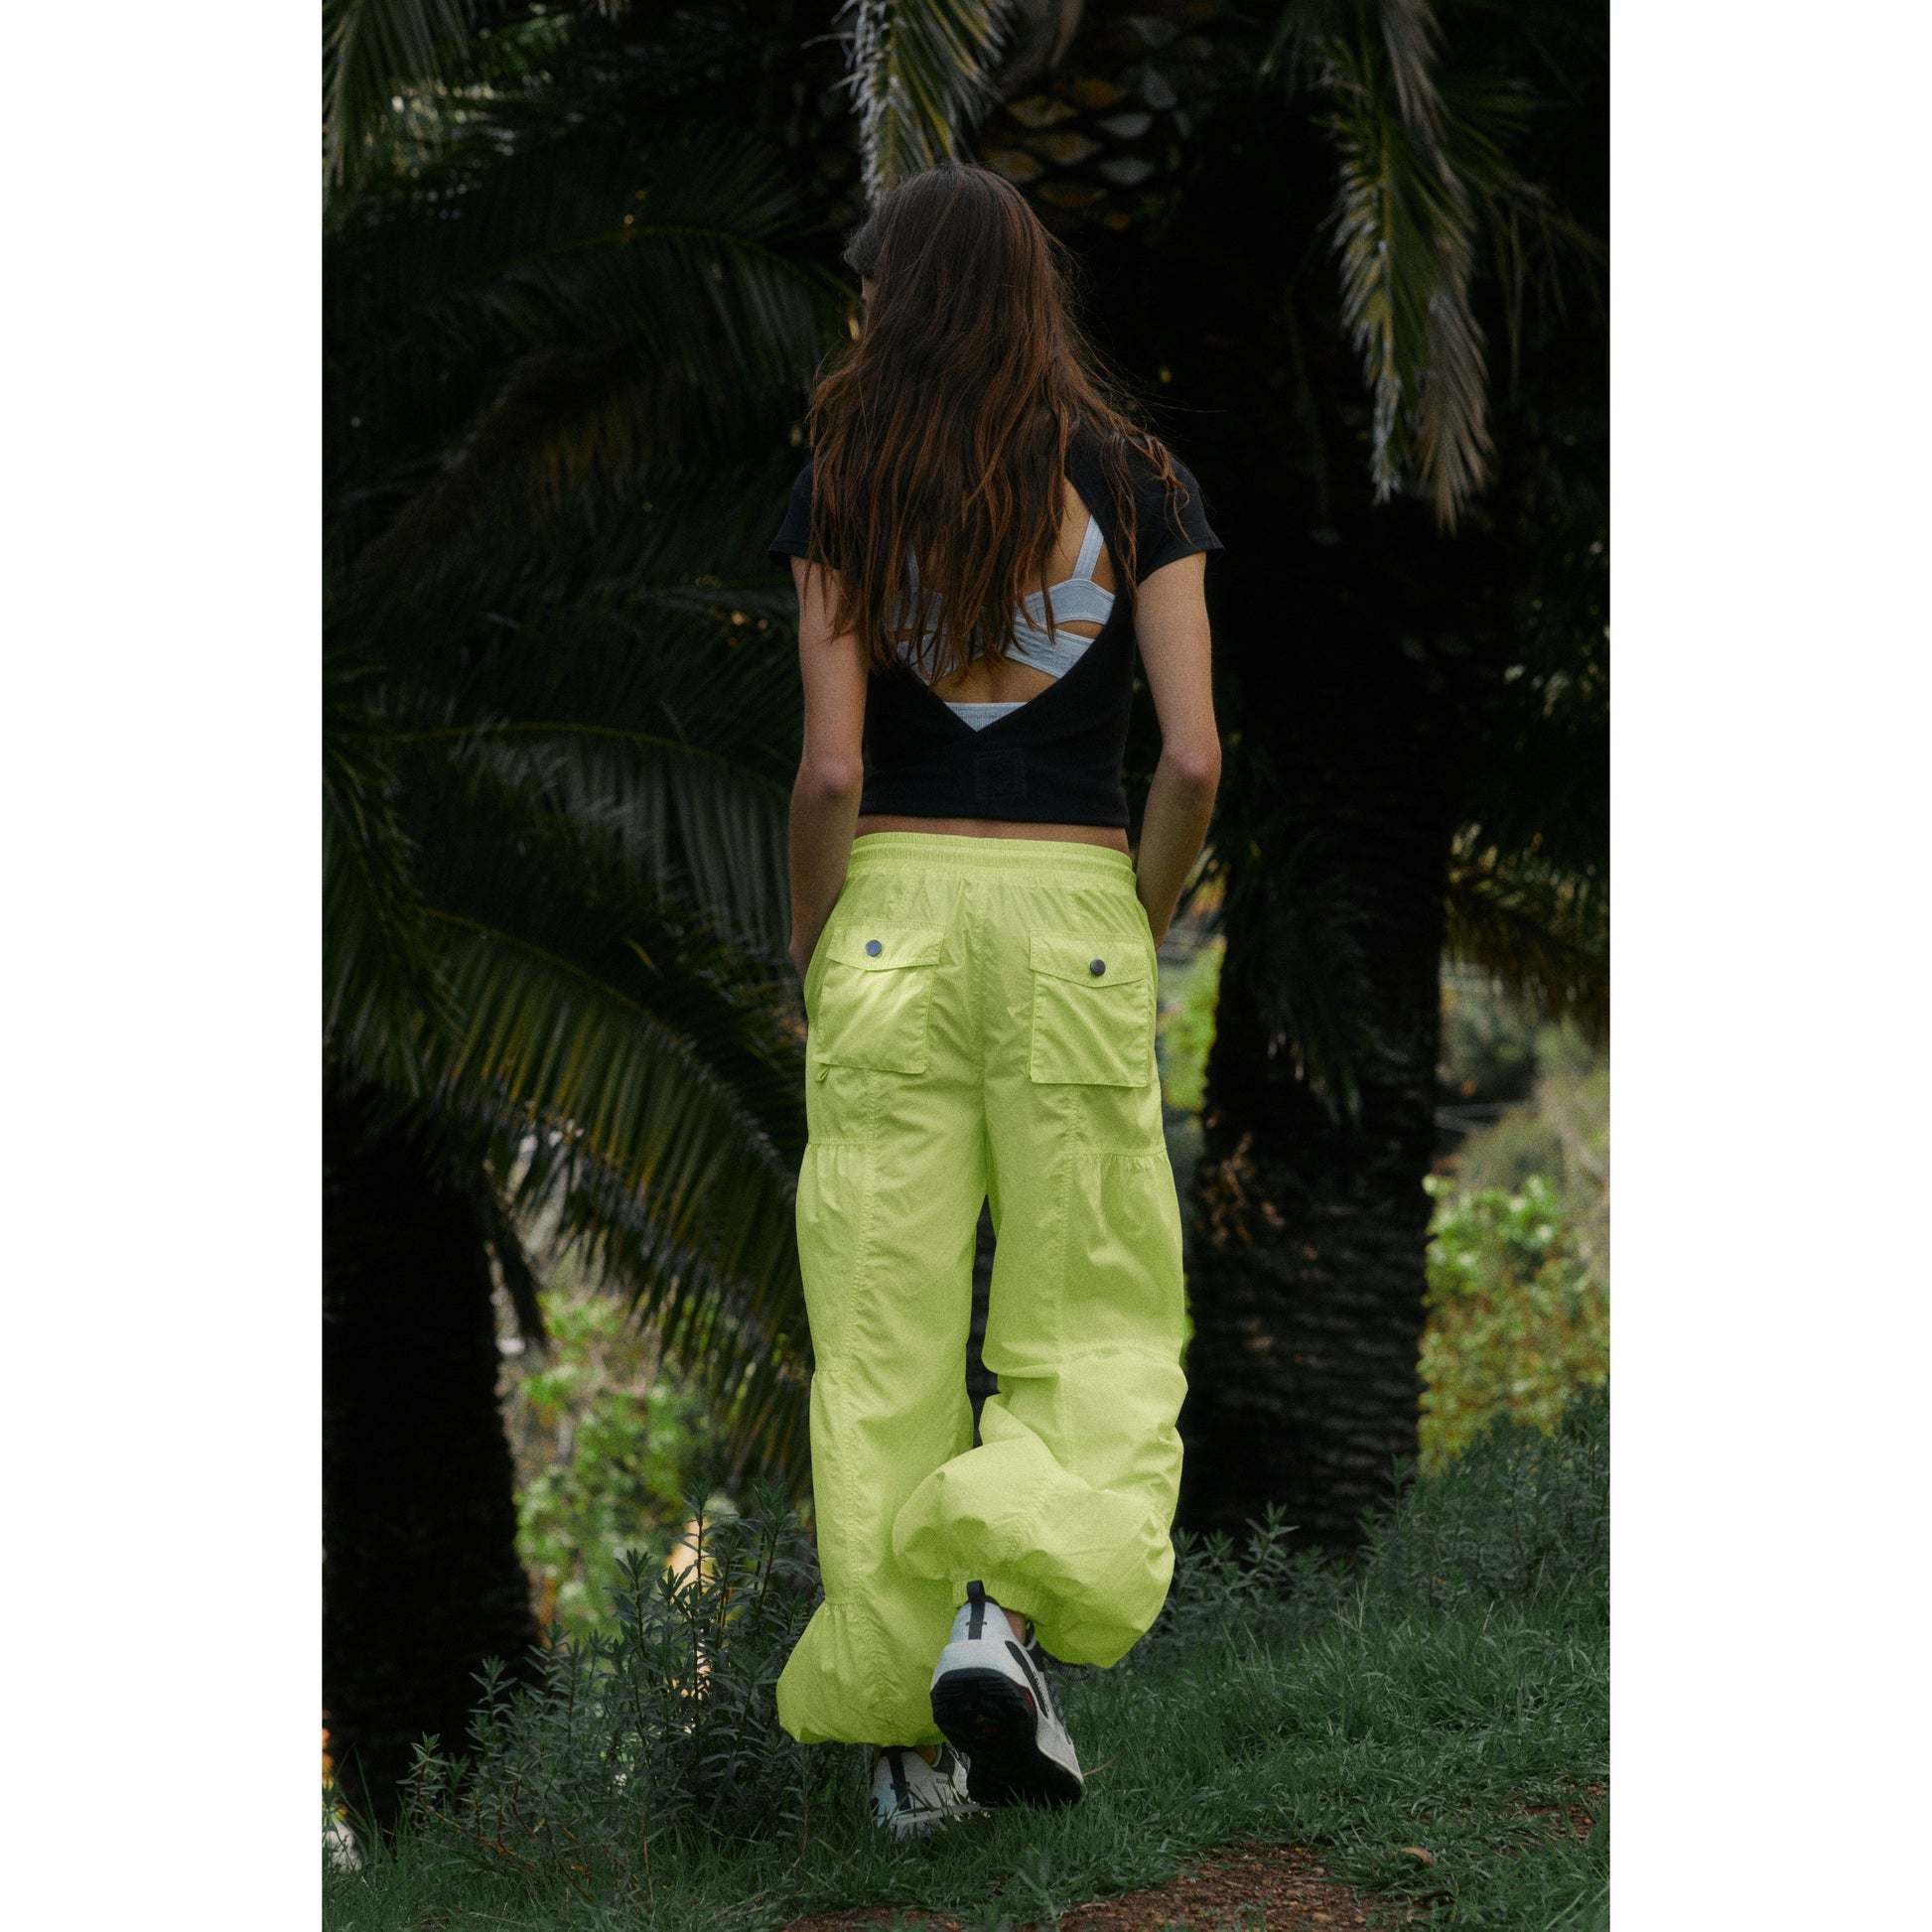 Woman from behind wearing Free People Movement's Lime Set Me Free Pant and a black and white top, standing amidst tropical foliage.